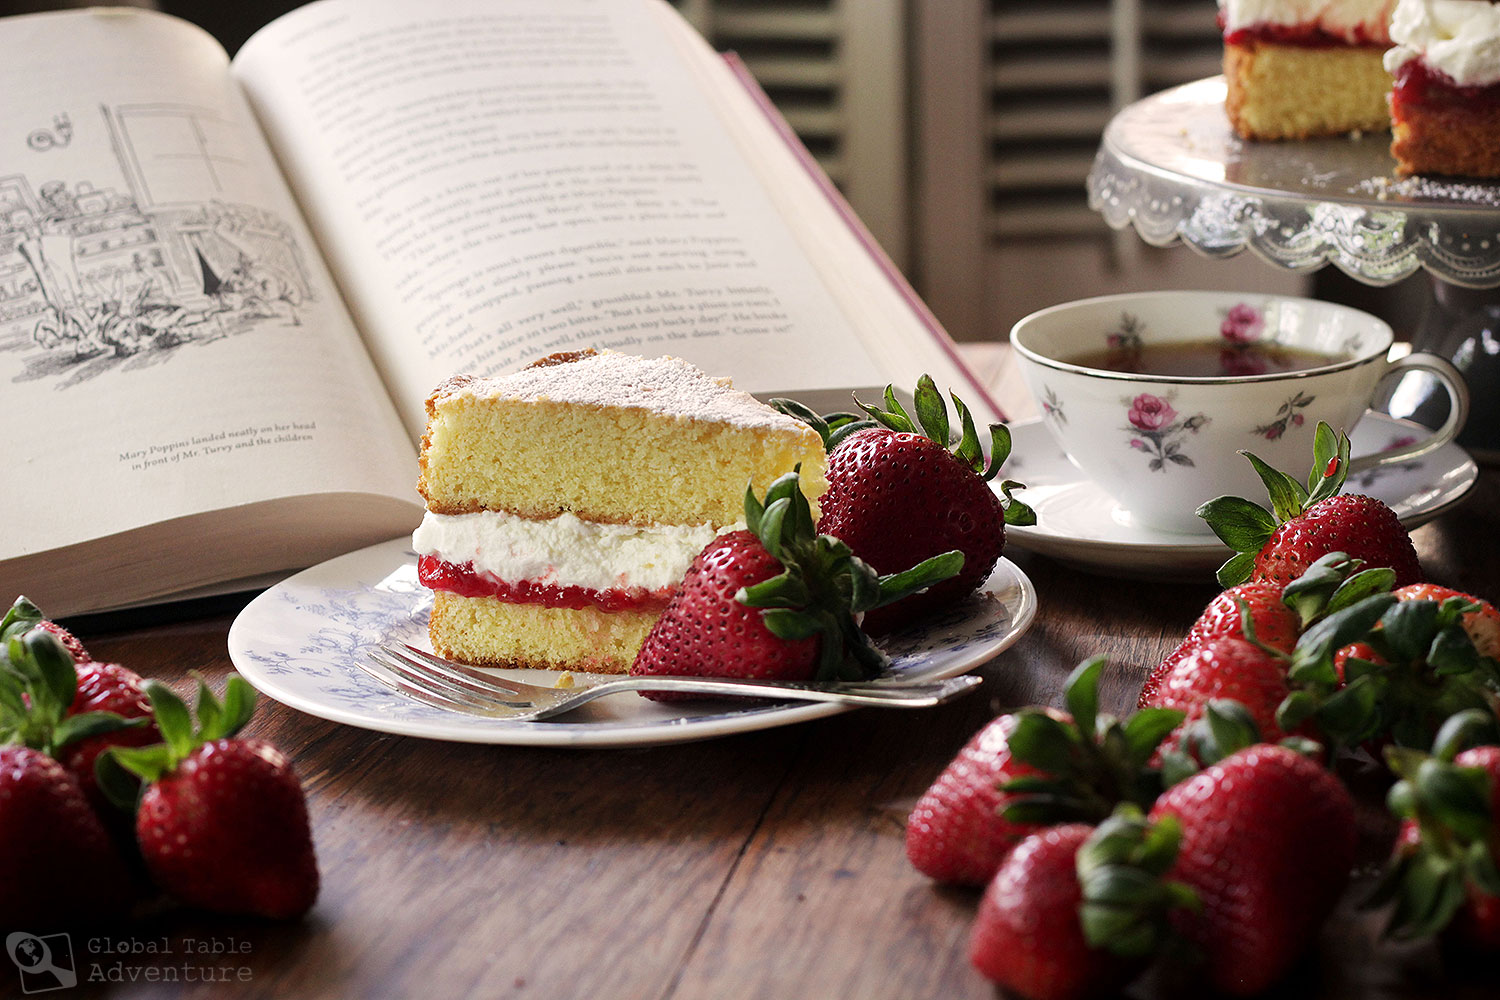 Victoria Sponge Cake Recipe inspired by Mary Poppins